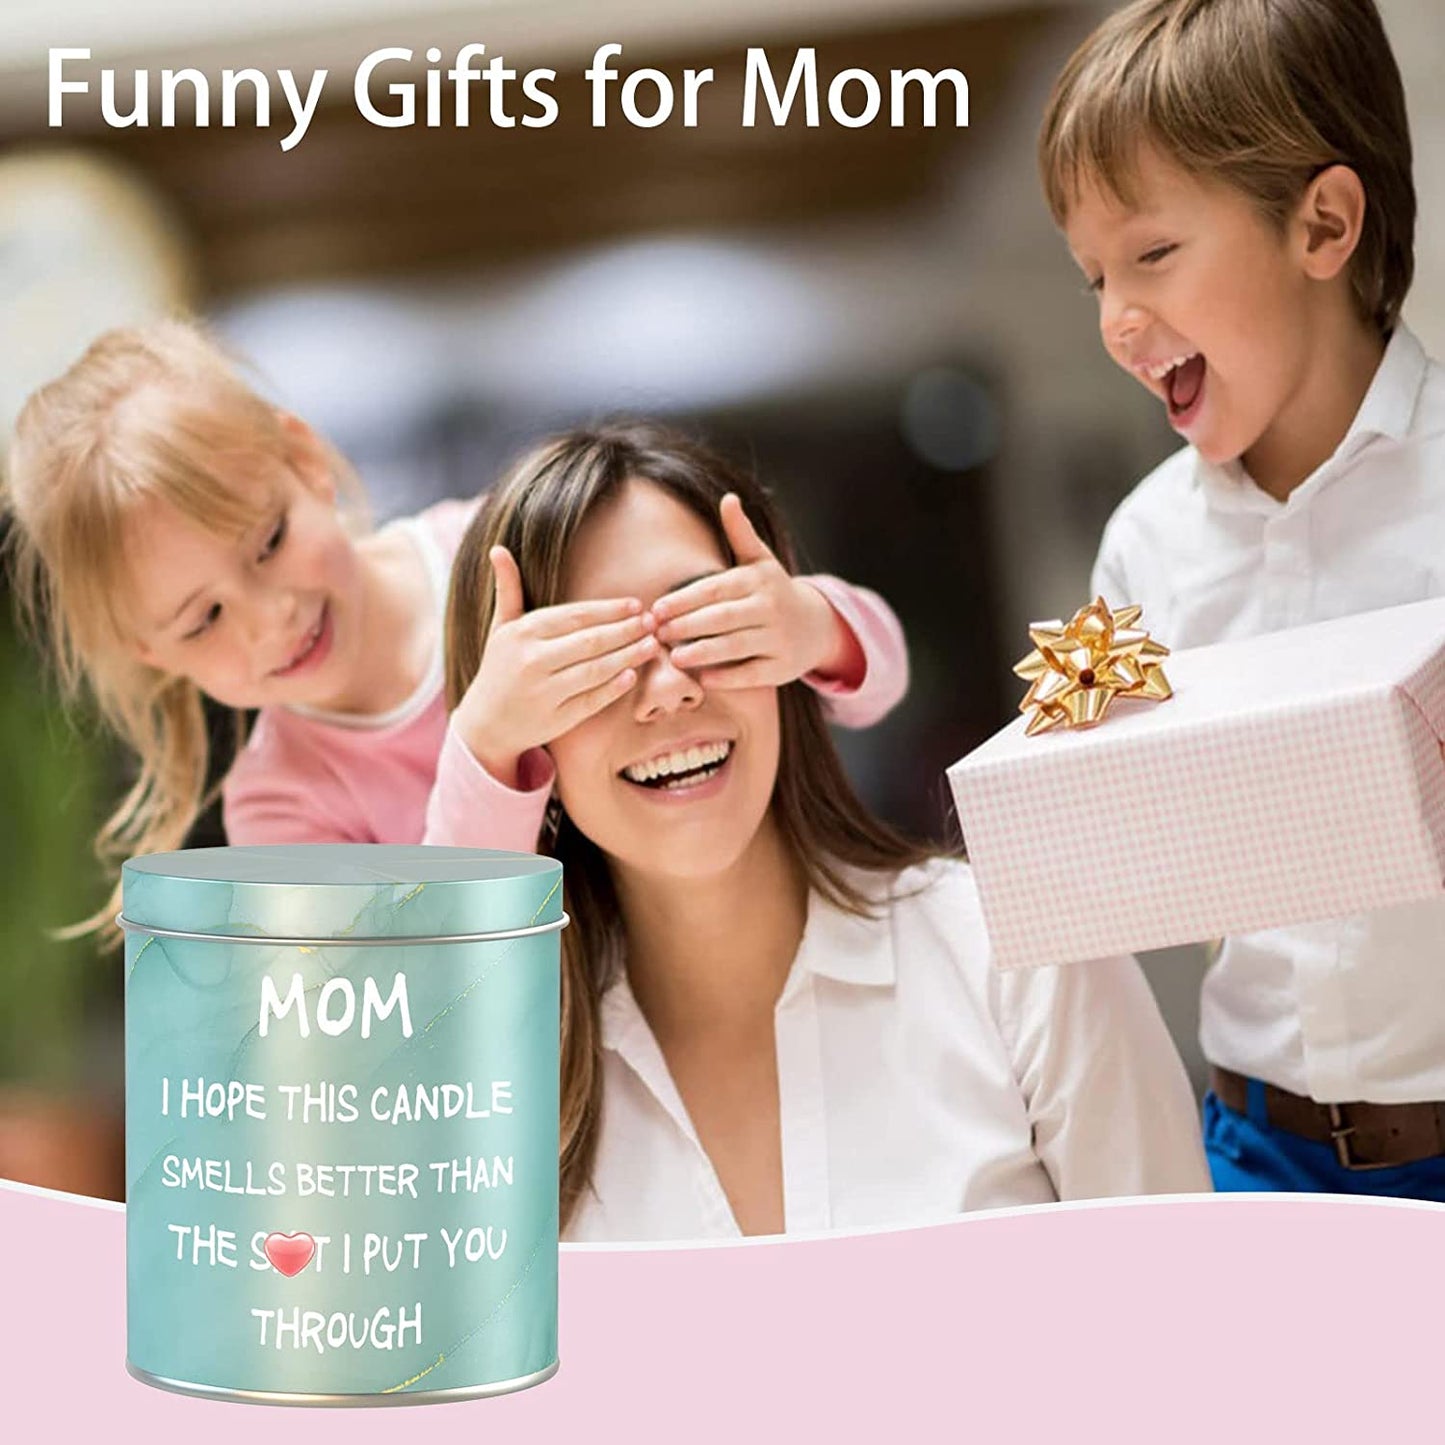 Gifts for Mom, Mothers Day Gifts for Mom, Mom Gifts from Daughter Son, Funny Christmas Birthday Gifts for Mom, Great Mother Gifts Ideas, Scented Candles